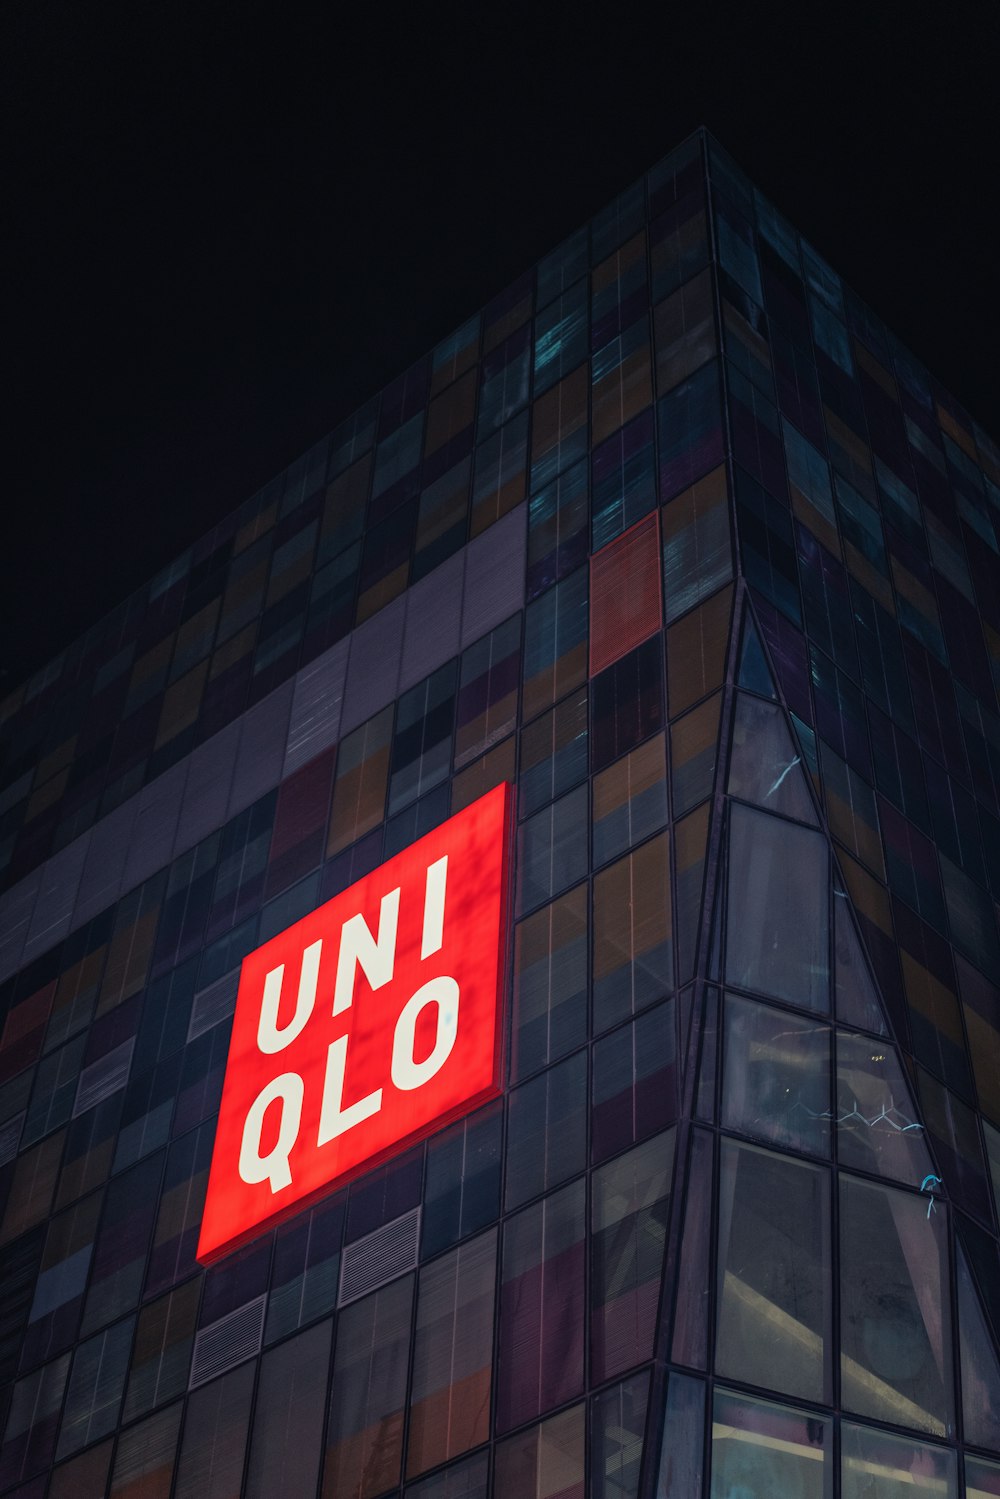 Uniqlo Pictures | Download Free Images on Unsplash